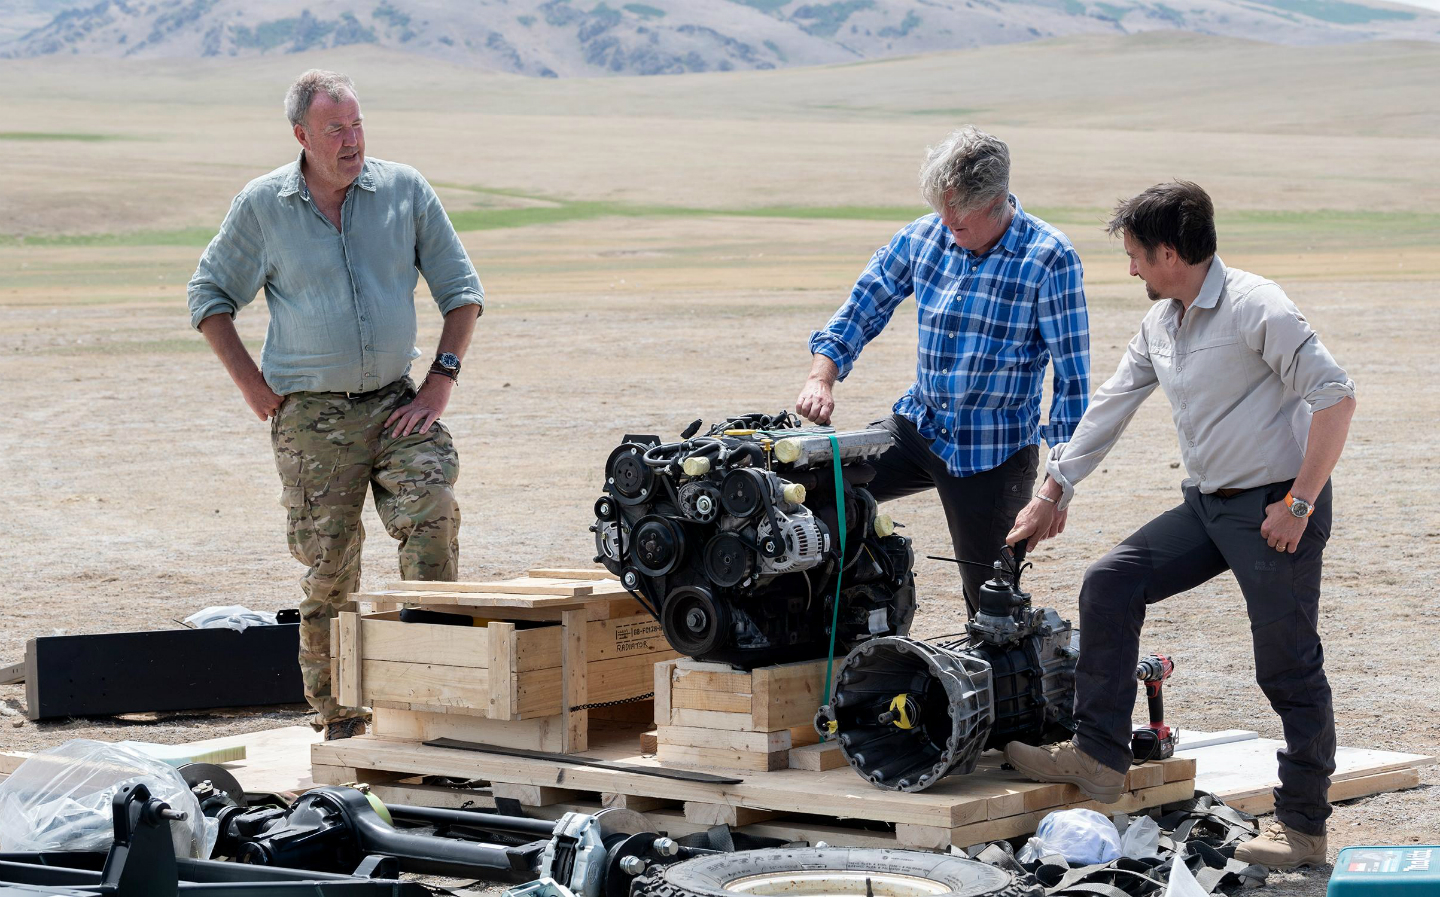 Jeremy Clarkson on The Grand Tour Series 3's globetrotting high jinks